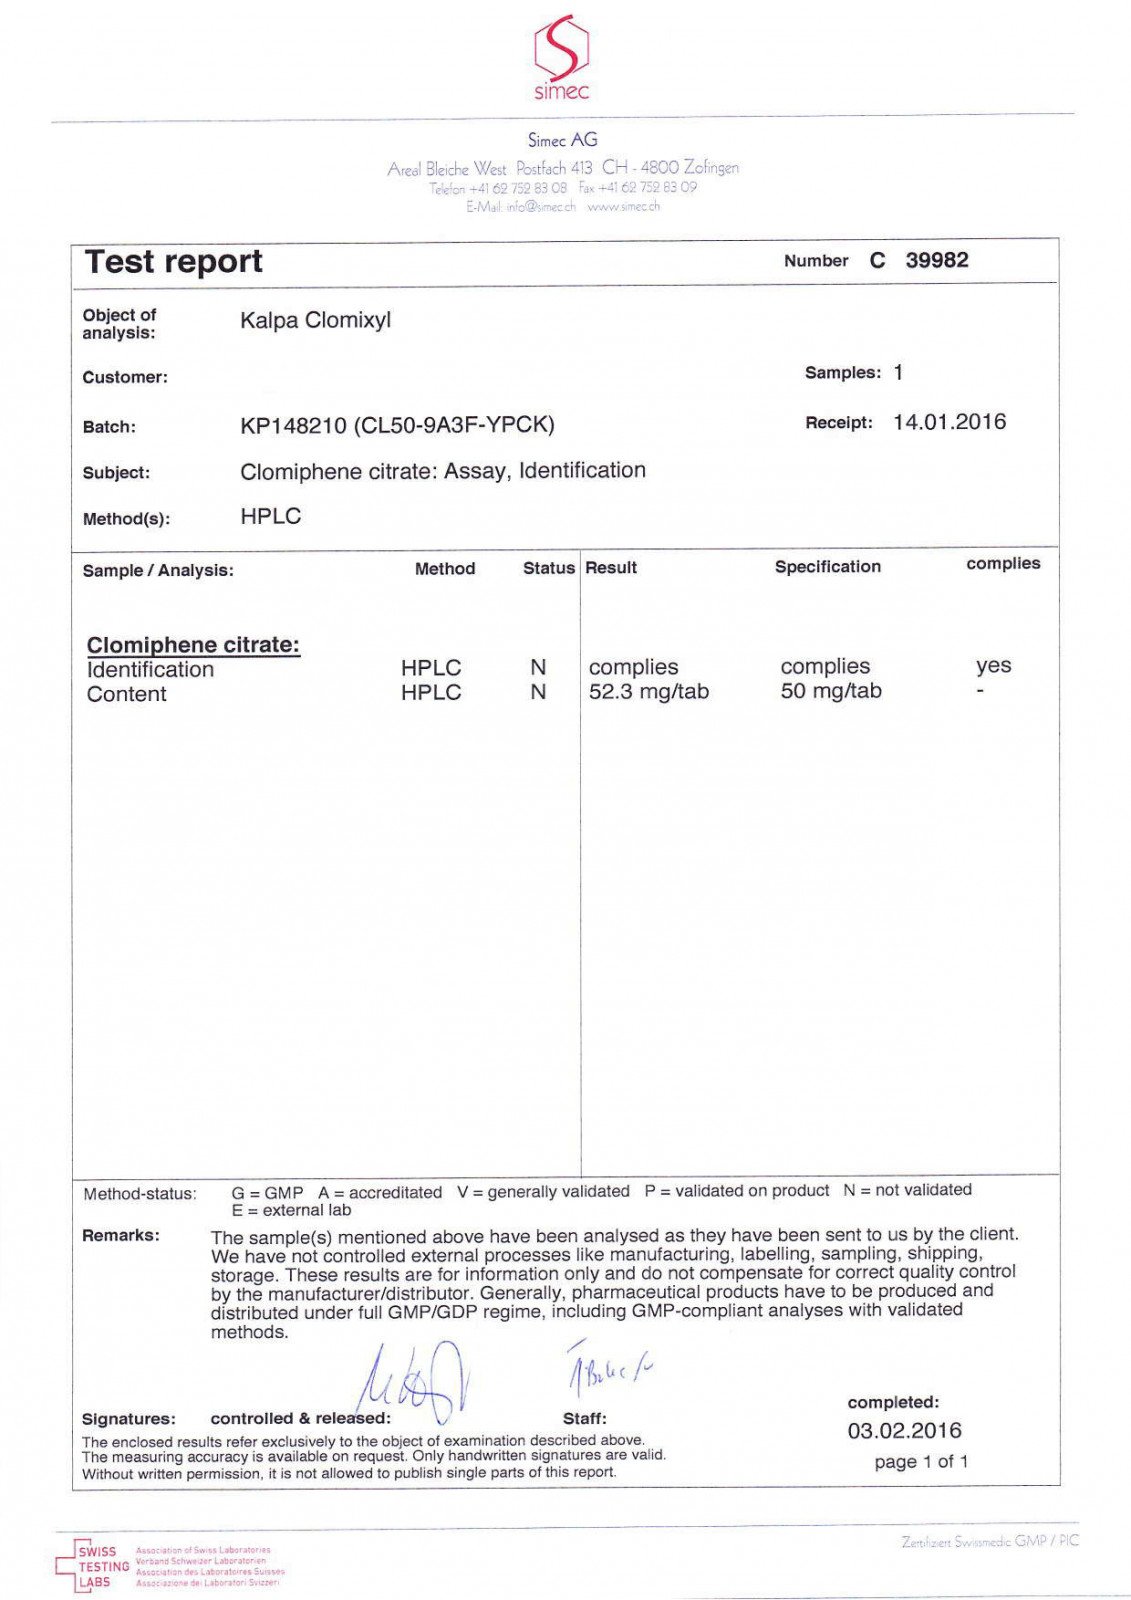 clomixyl lab test results